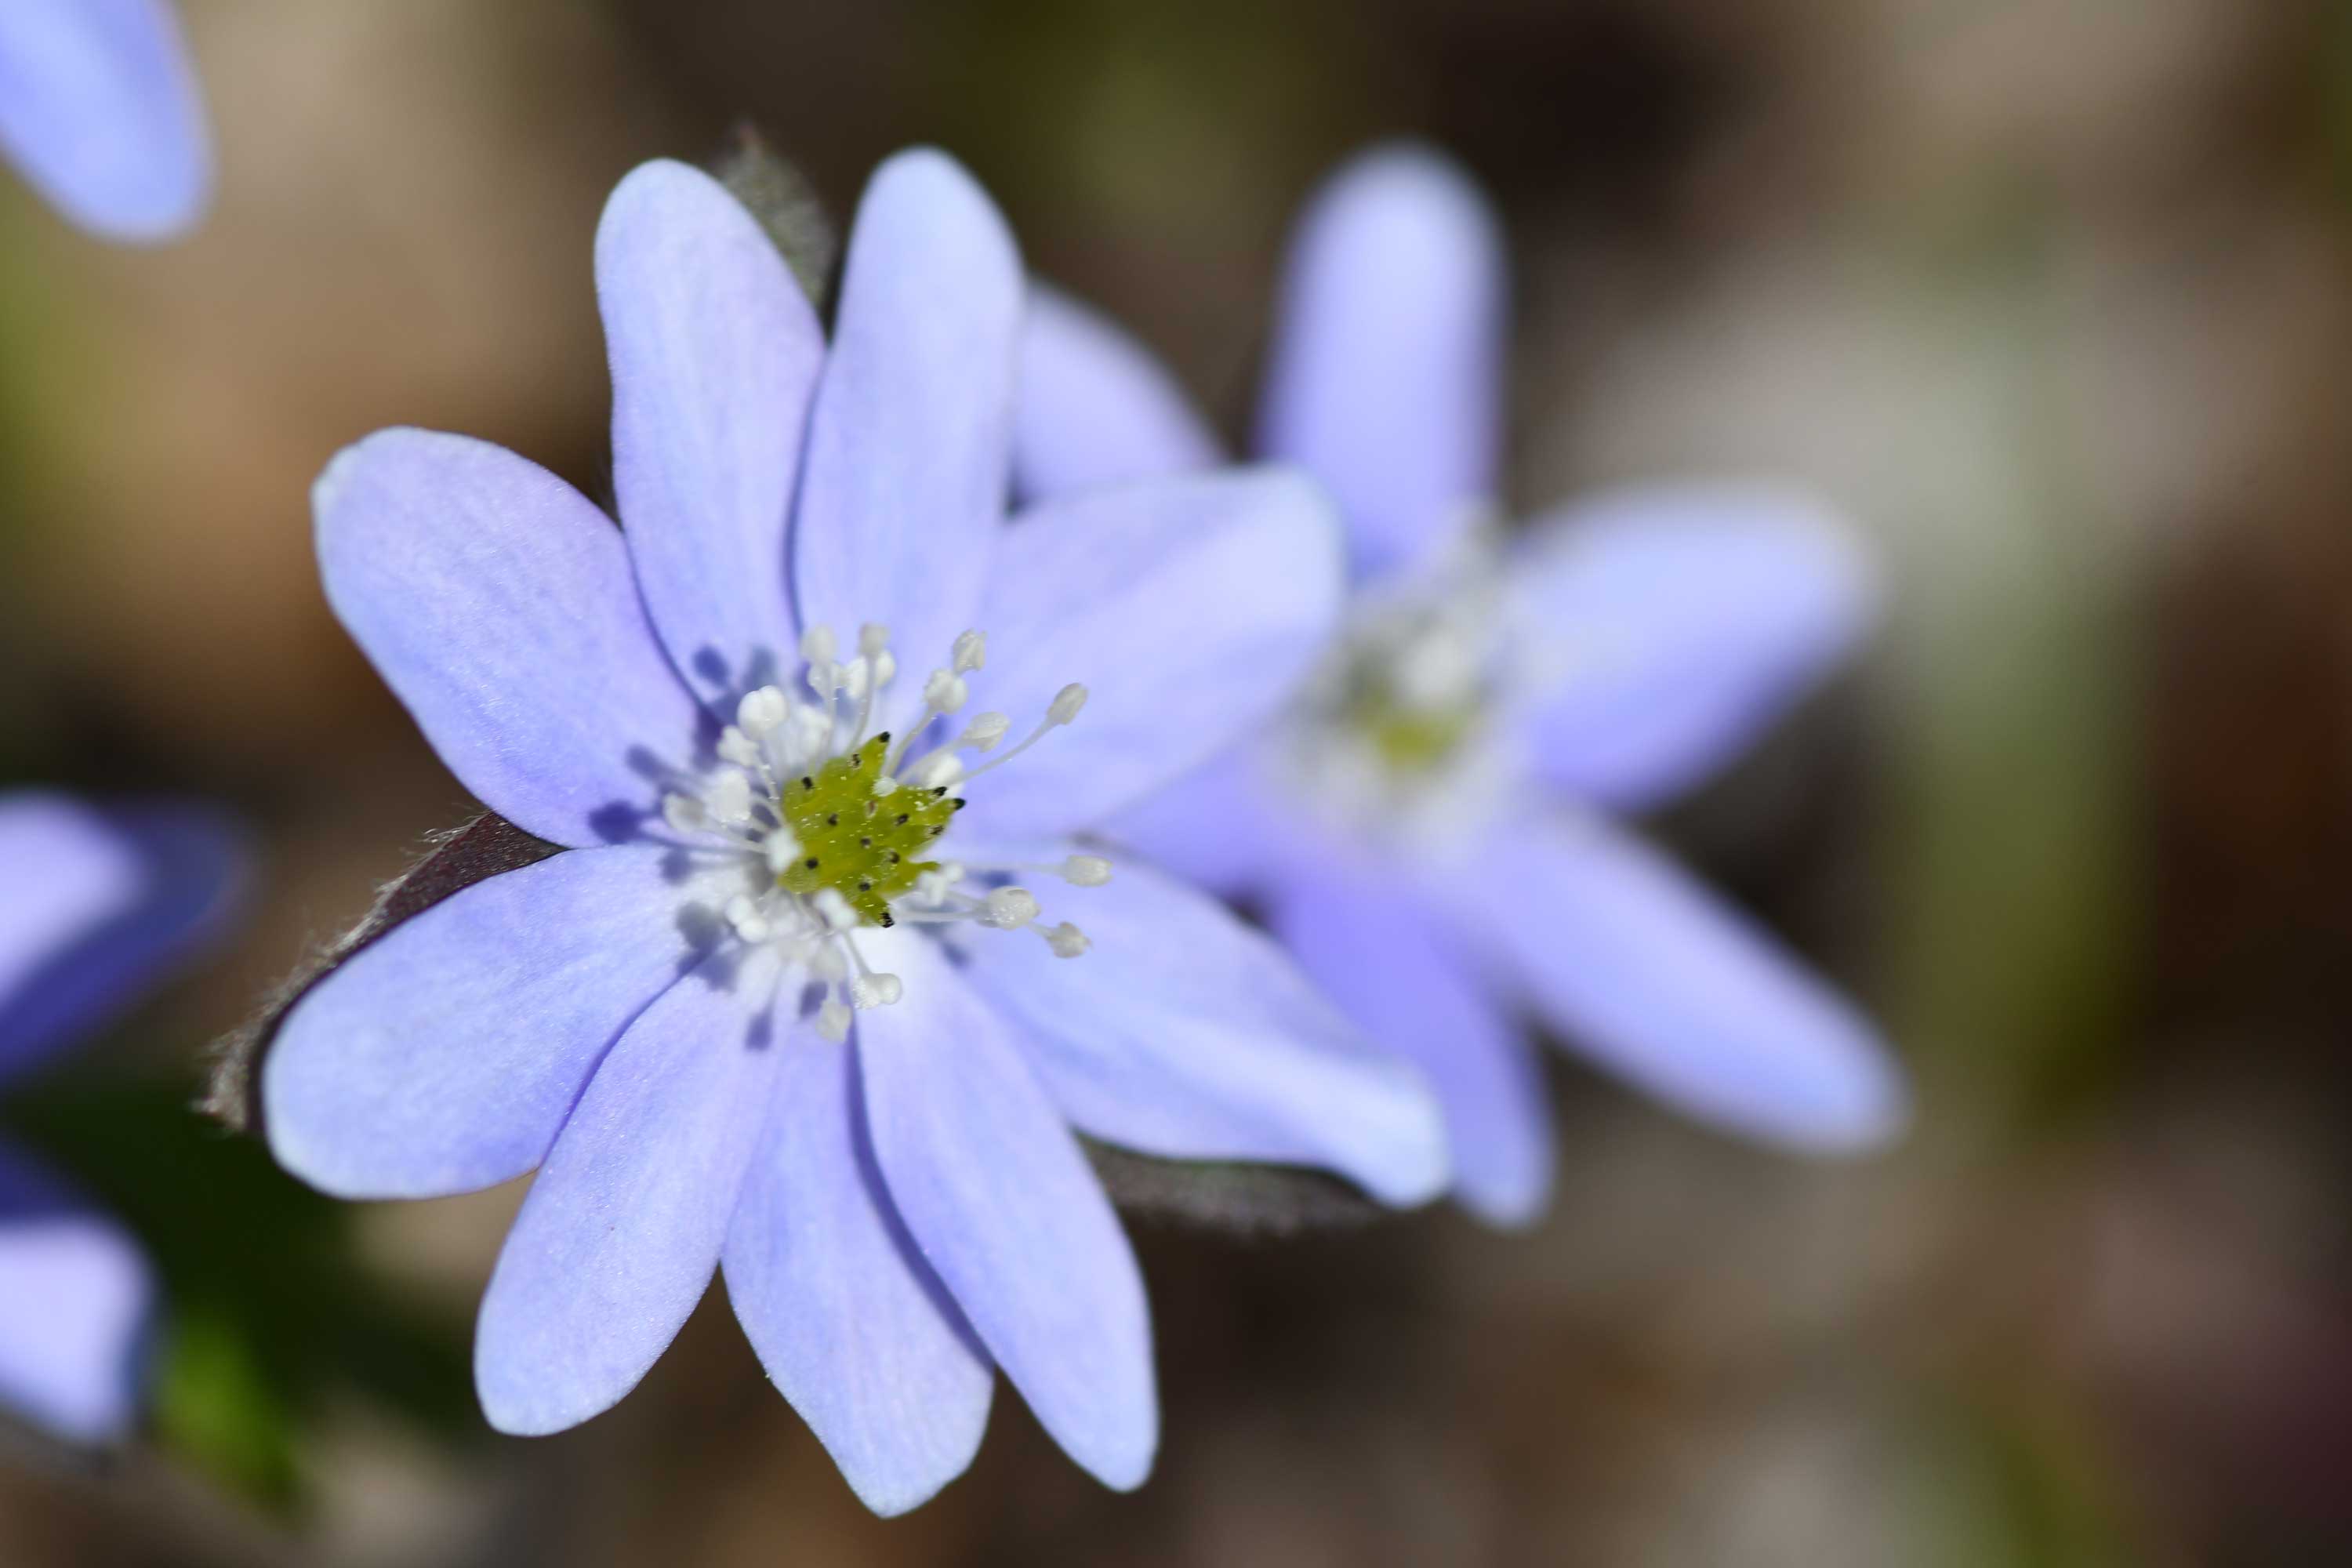 The purple petals of hepatica are seen up close.